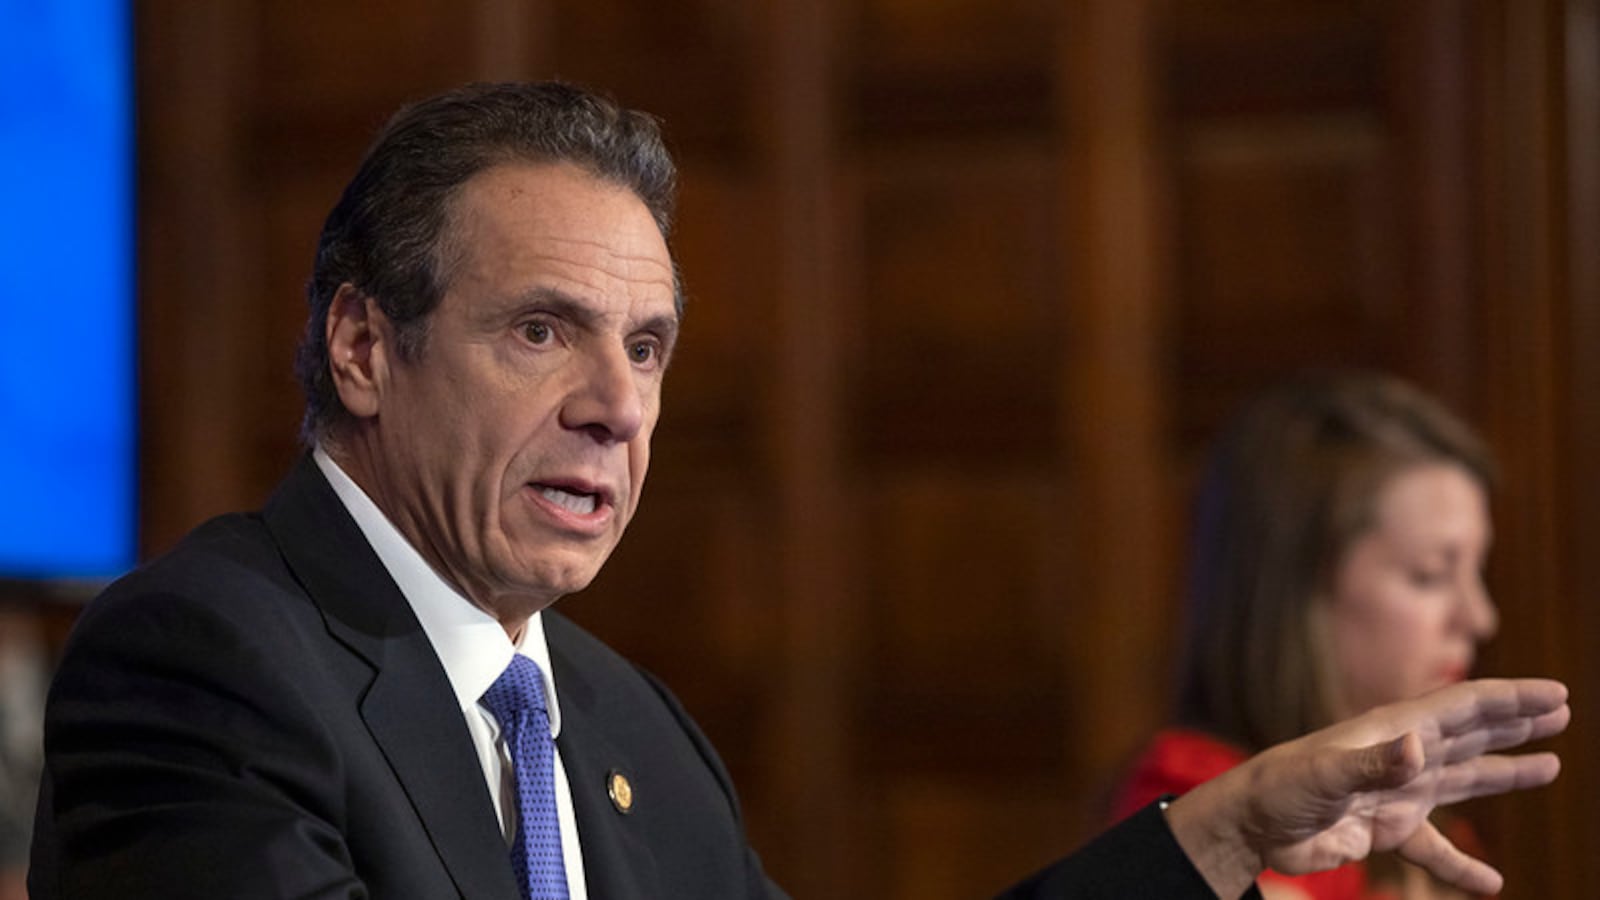 Gov. Andrew Cuomo announced Monday that school buildings across new York will remain closed through at least April 29, about two weeks longer than origianlly planned.